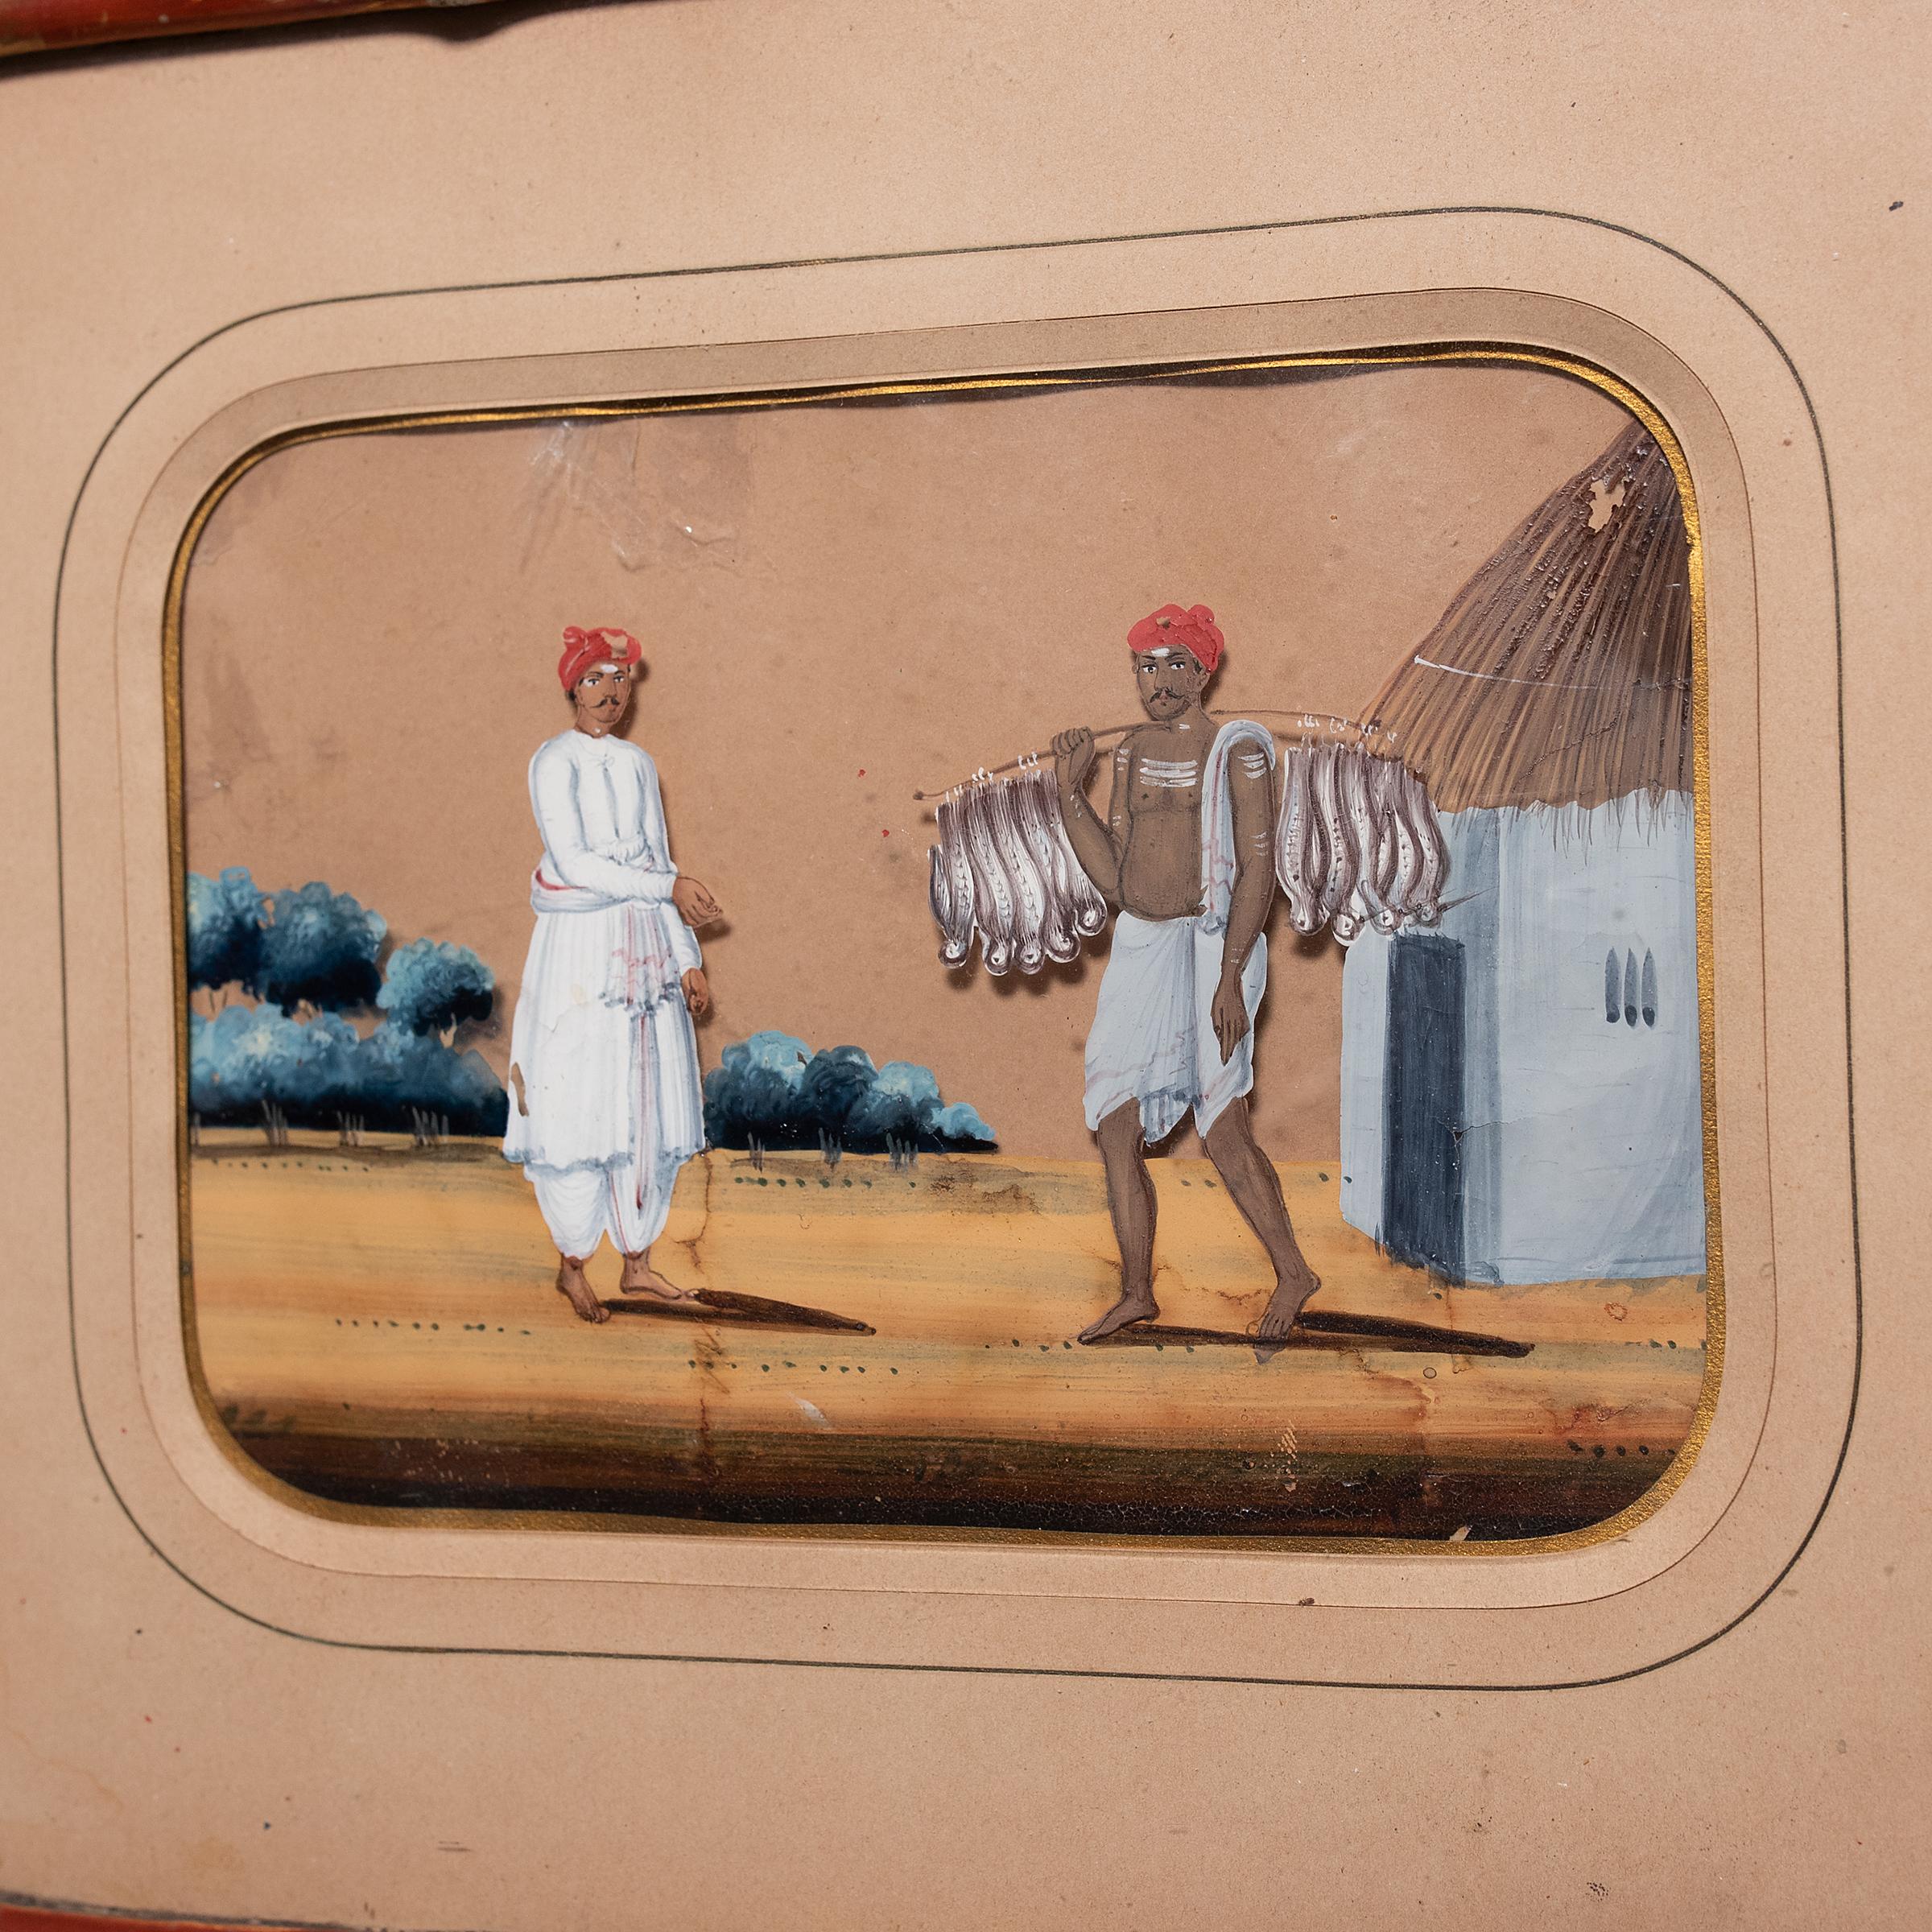 Made with gouache paint and encased in a charming bamboo frame is this miniature Indian mica painting depicting village life in the 19th-century. Considered a novelty for the colonial tourist market, miniature mica paintings were commissioned by the